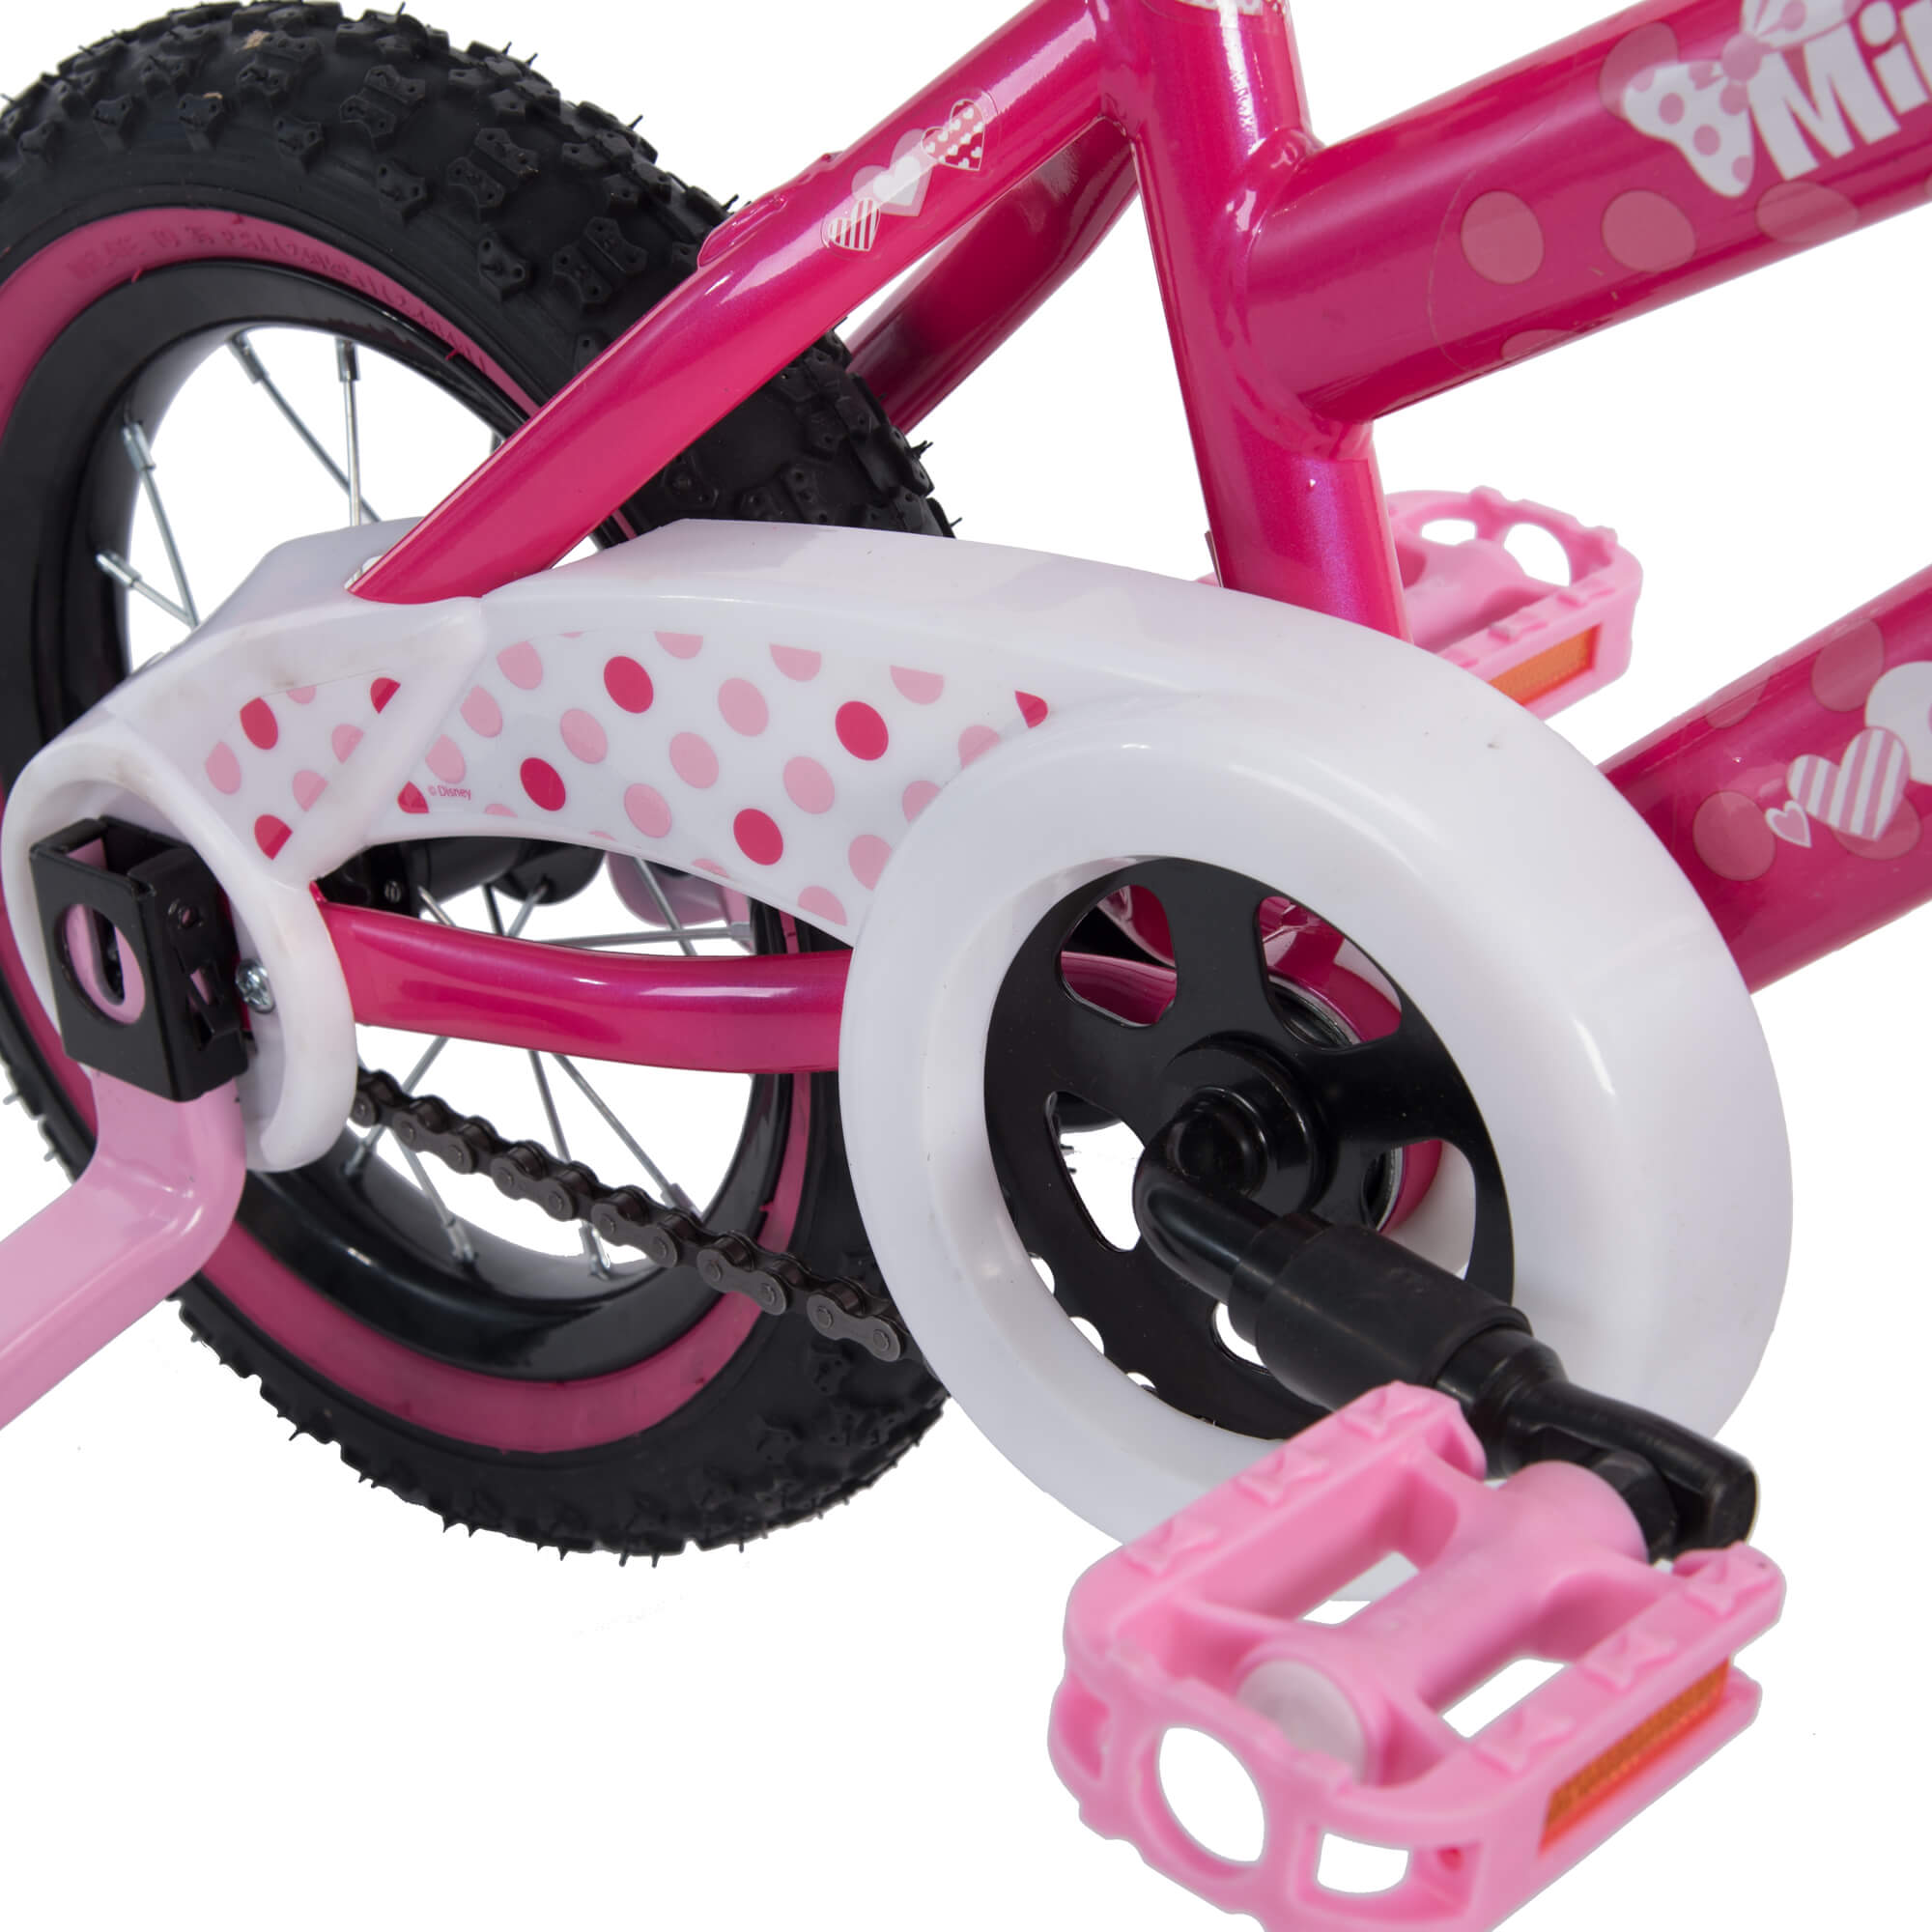 Disney Minnie Mouse 12-inch Bike by Huffy, Pink - image 5 of 6